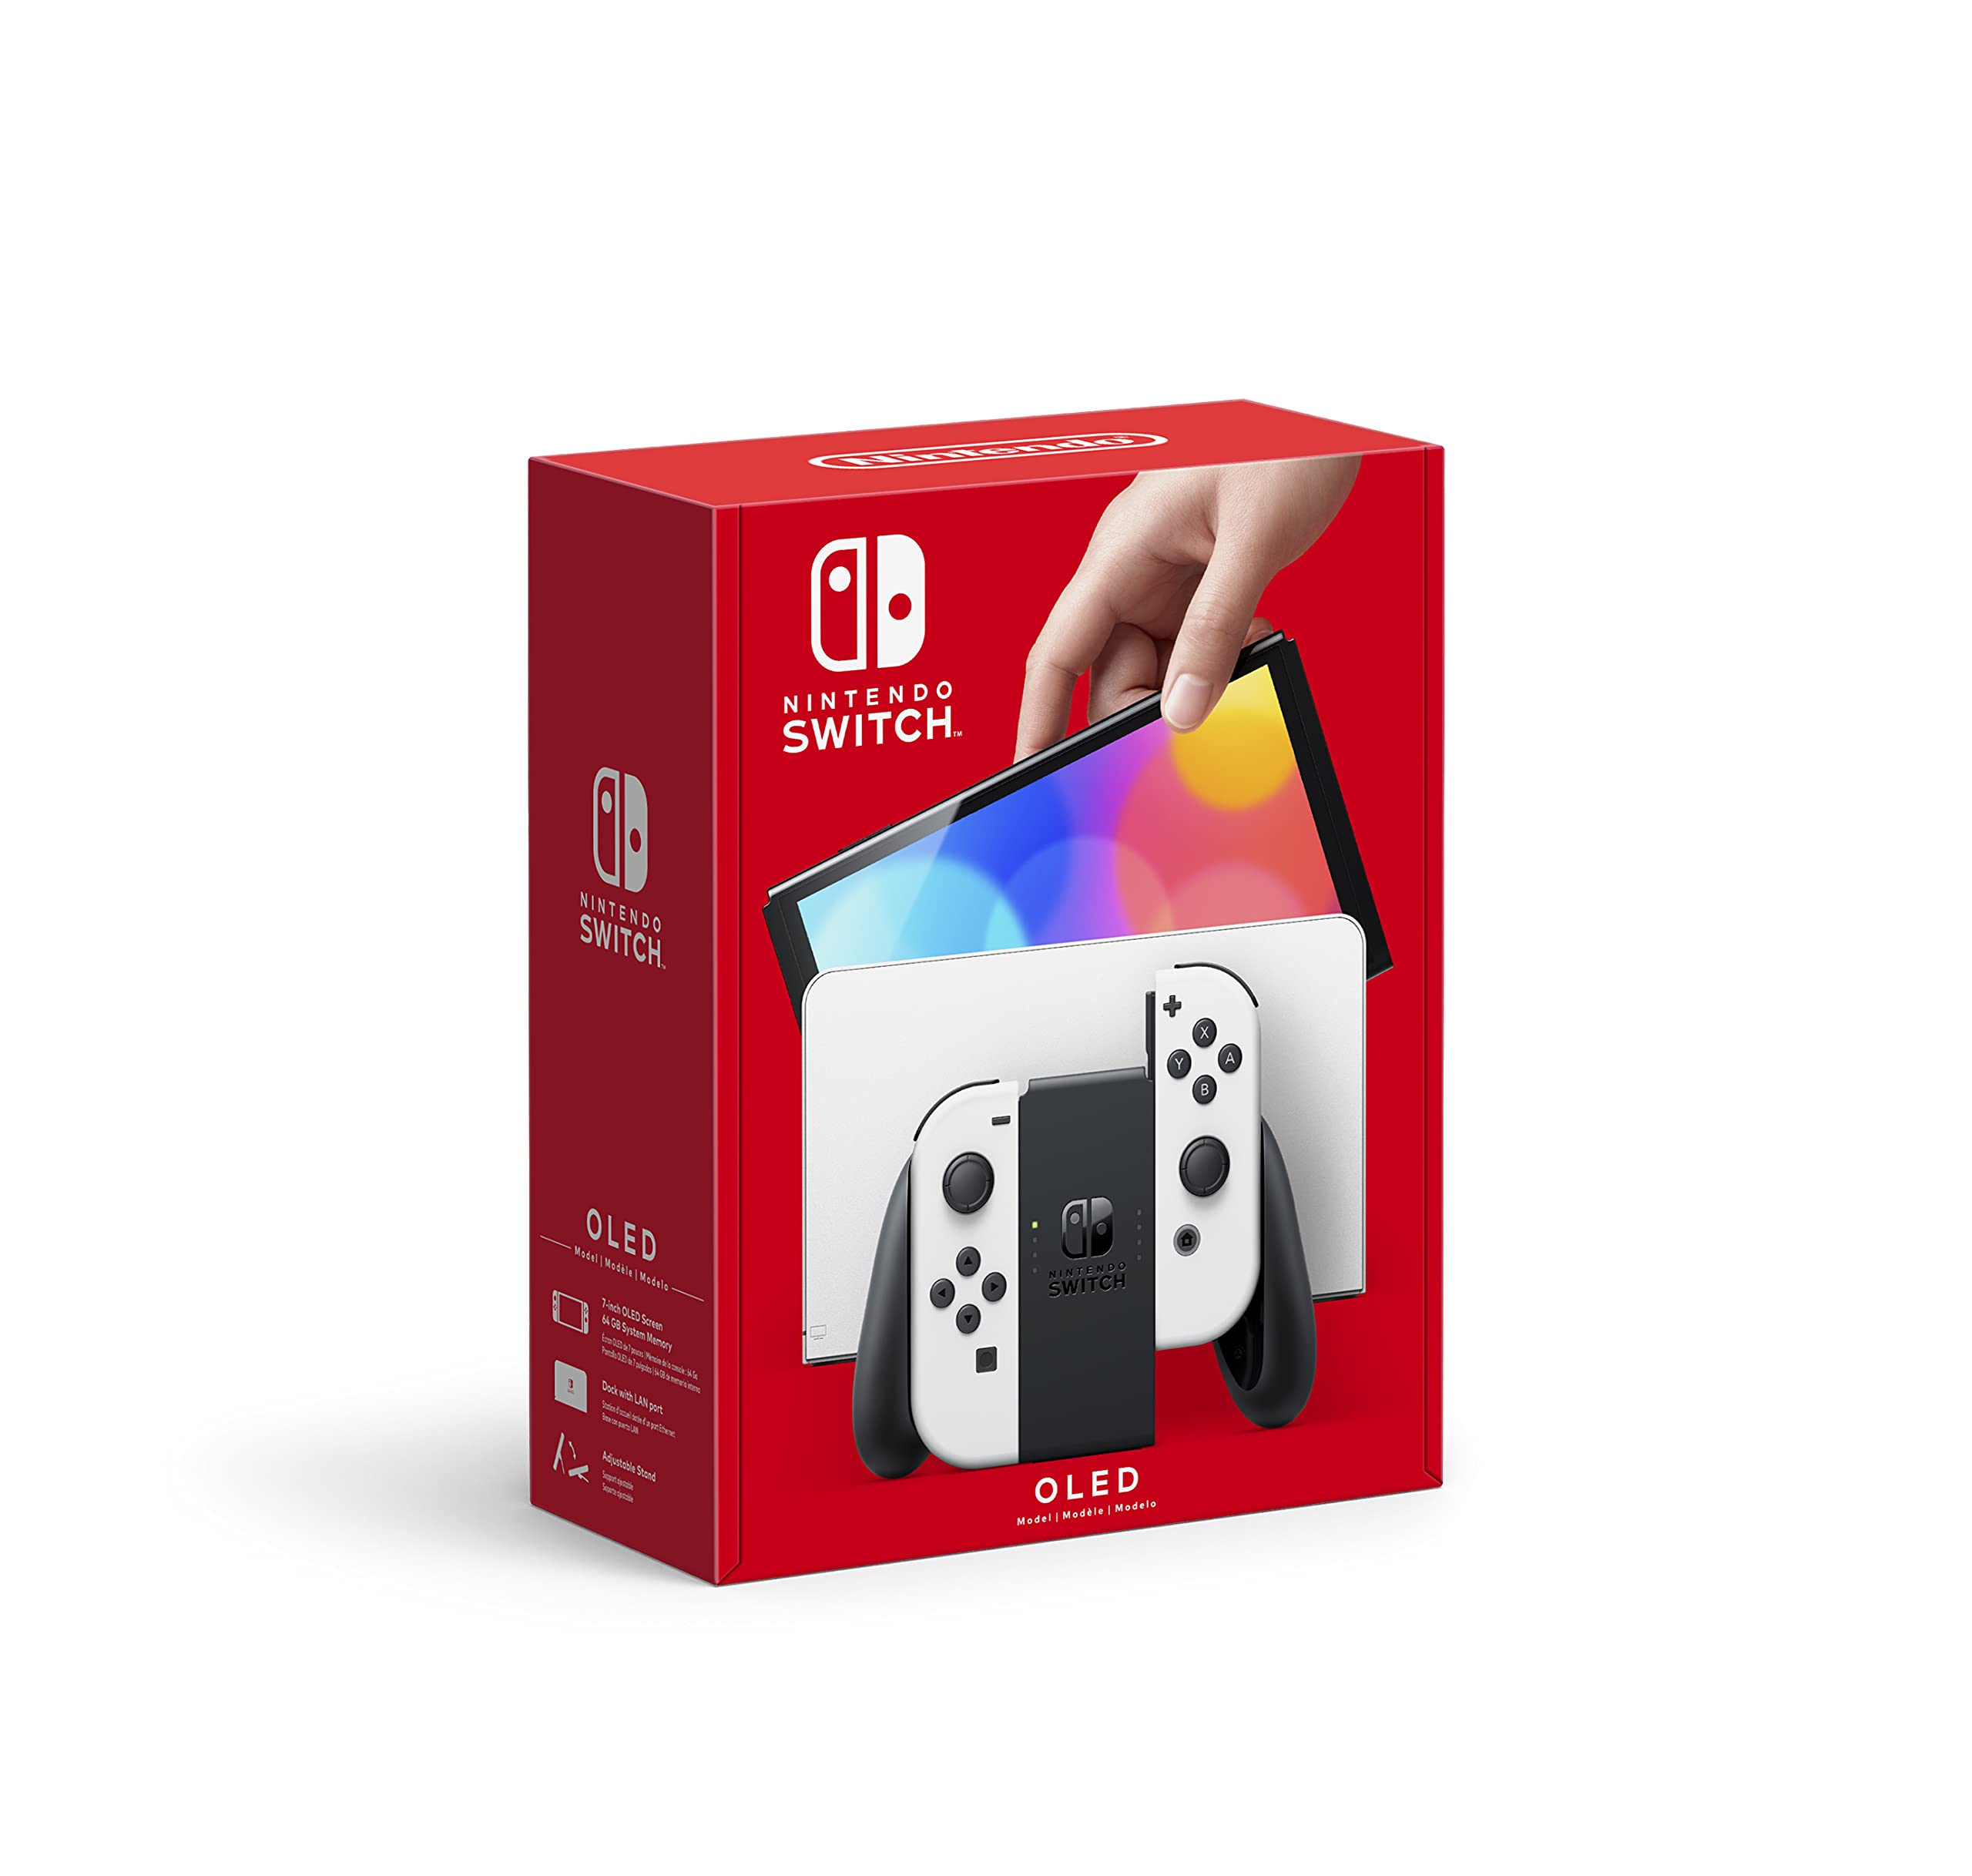 Nintendo Switch – OLED Model w/ White Joy-Con - NEW - Ships from Amazon 3rd Party Seller - $328.60